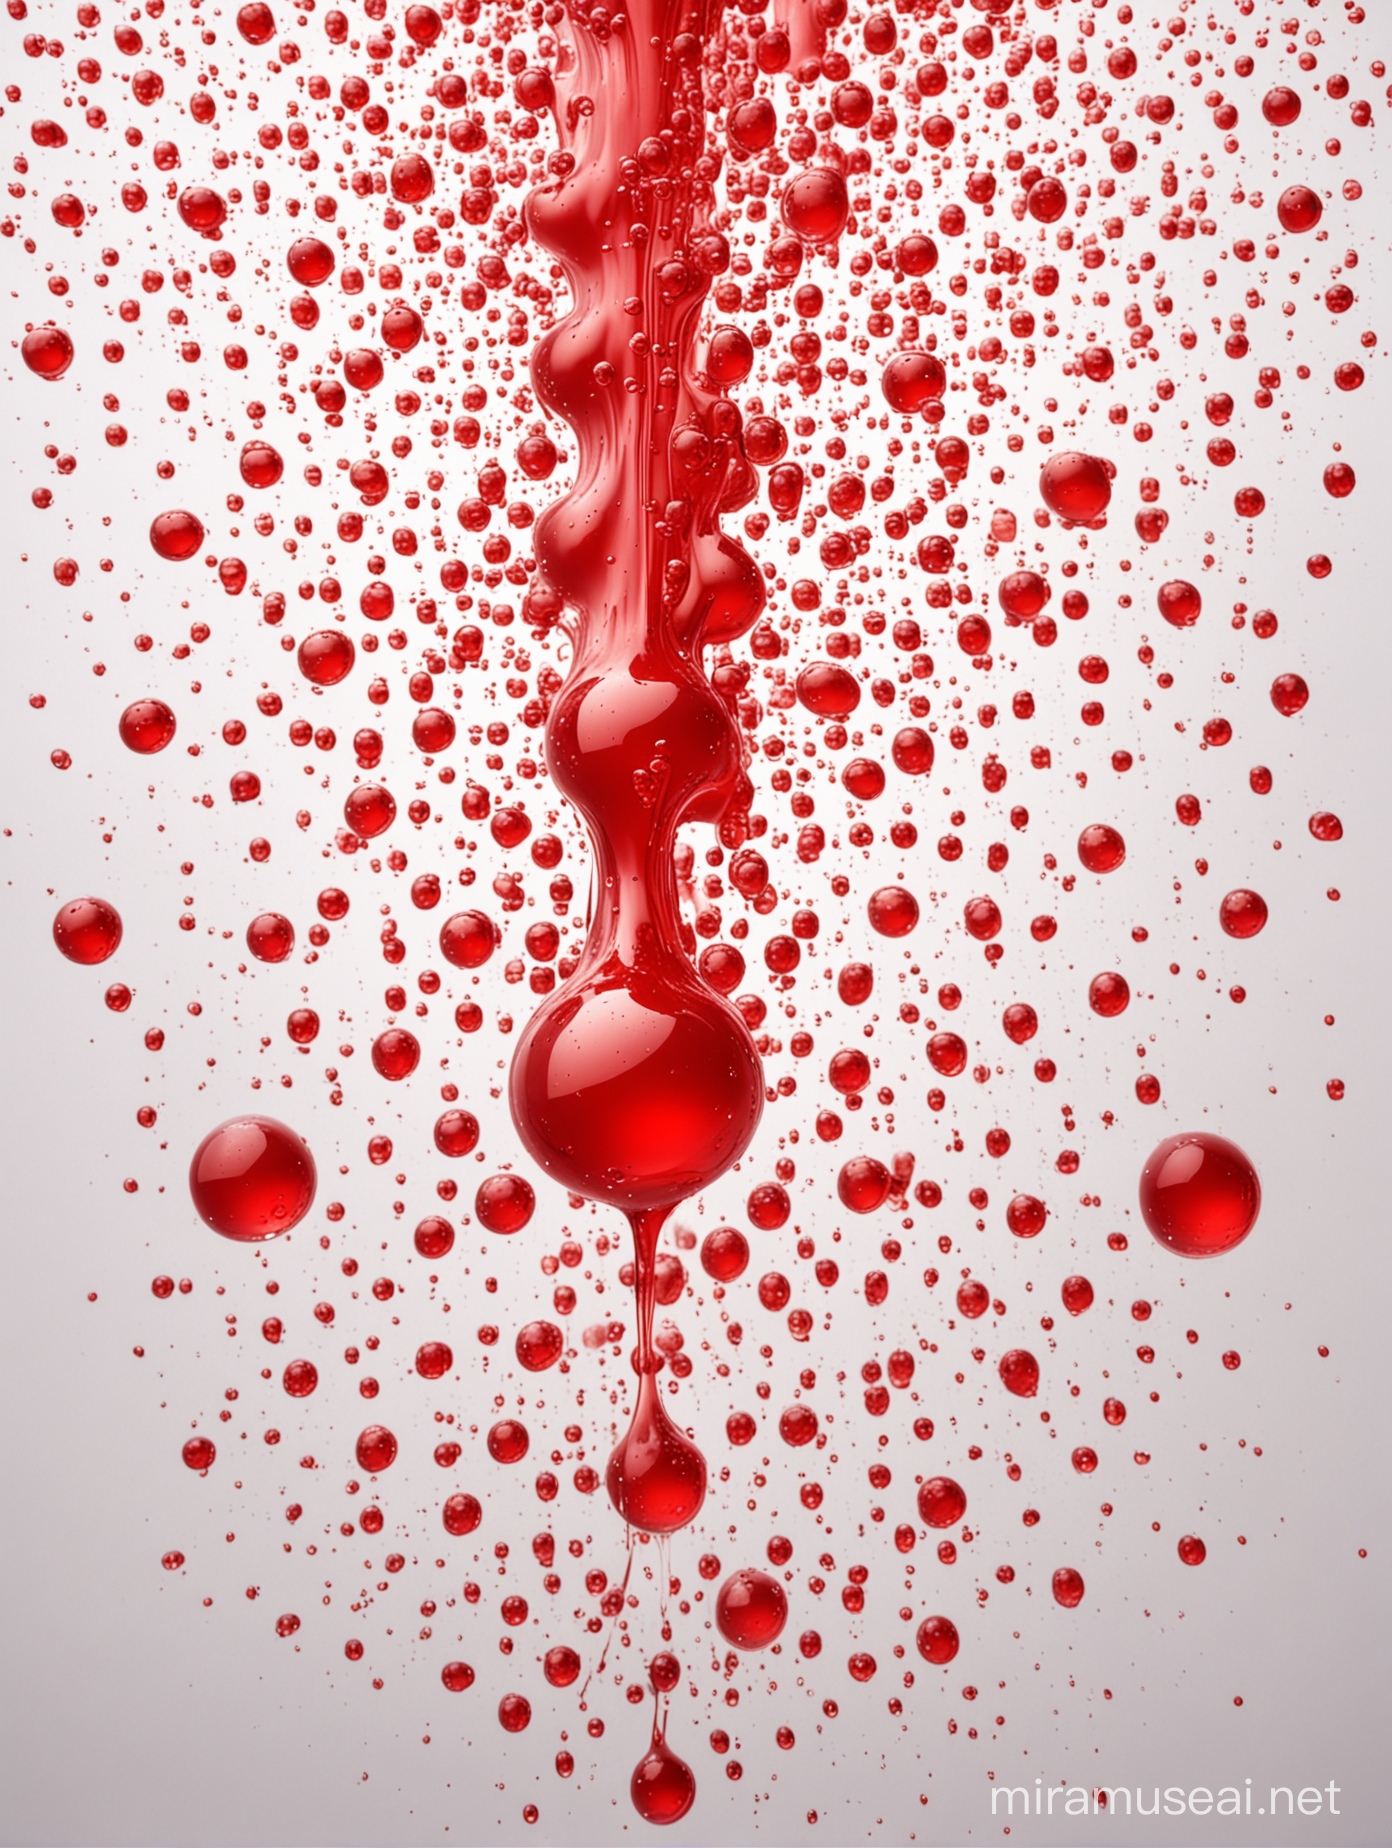 shiny red viscous liquid, Widely scattered showers, big and small dots on a white background